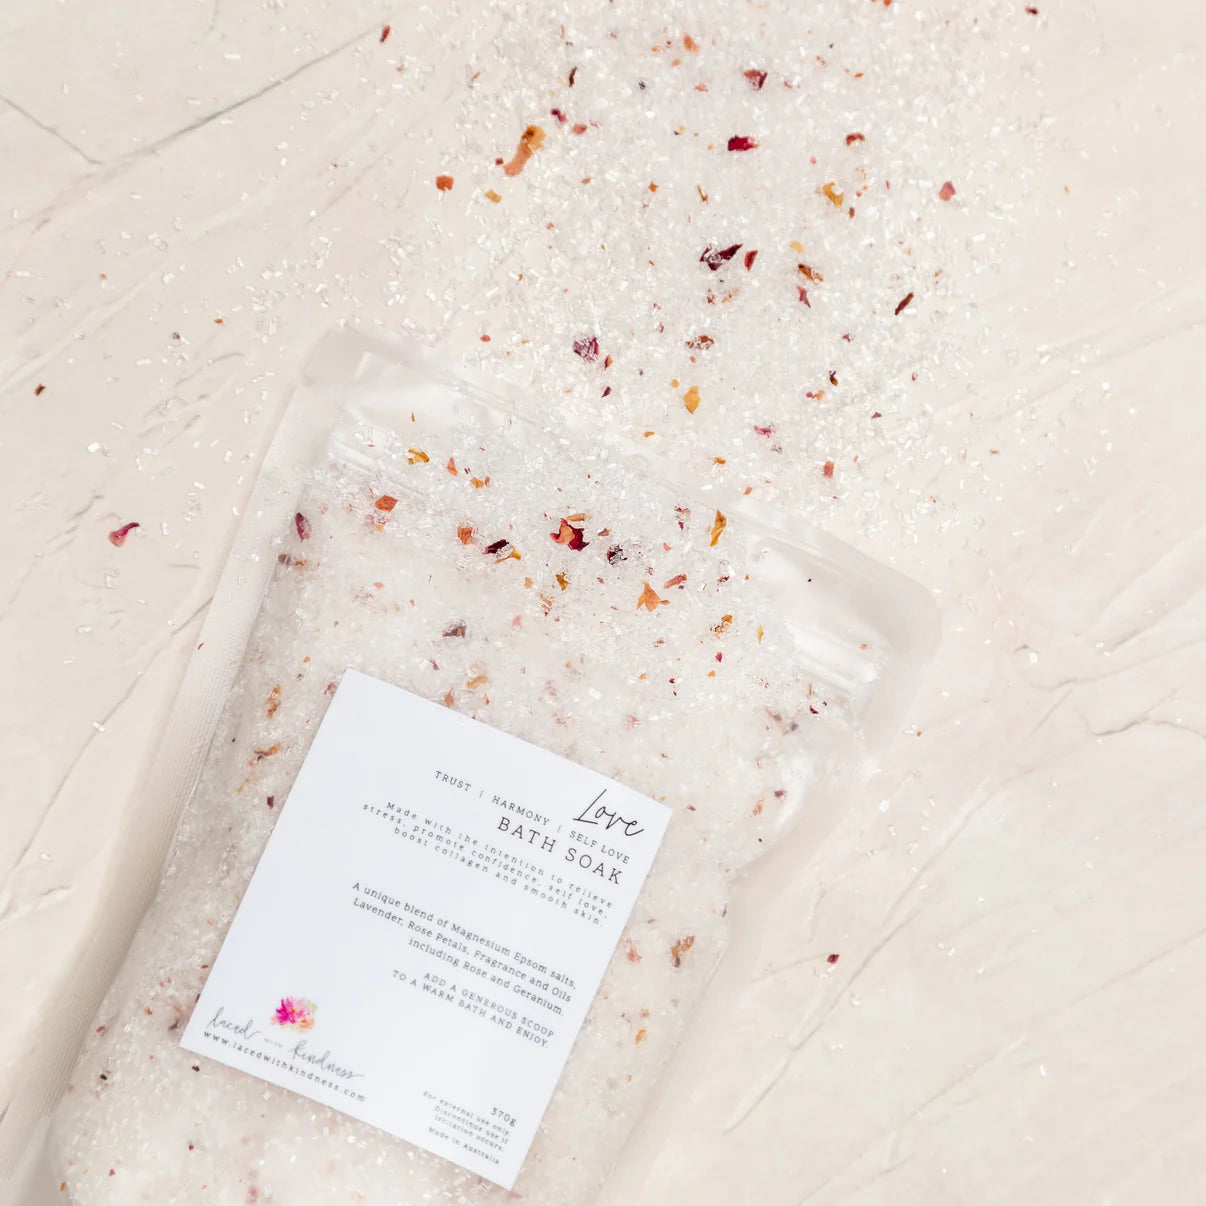 Laced with Kindness Bath Soak | Love